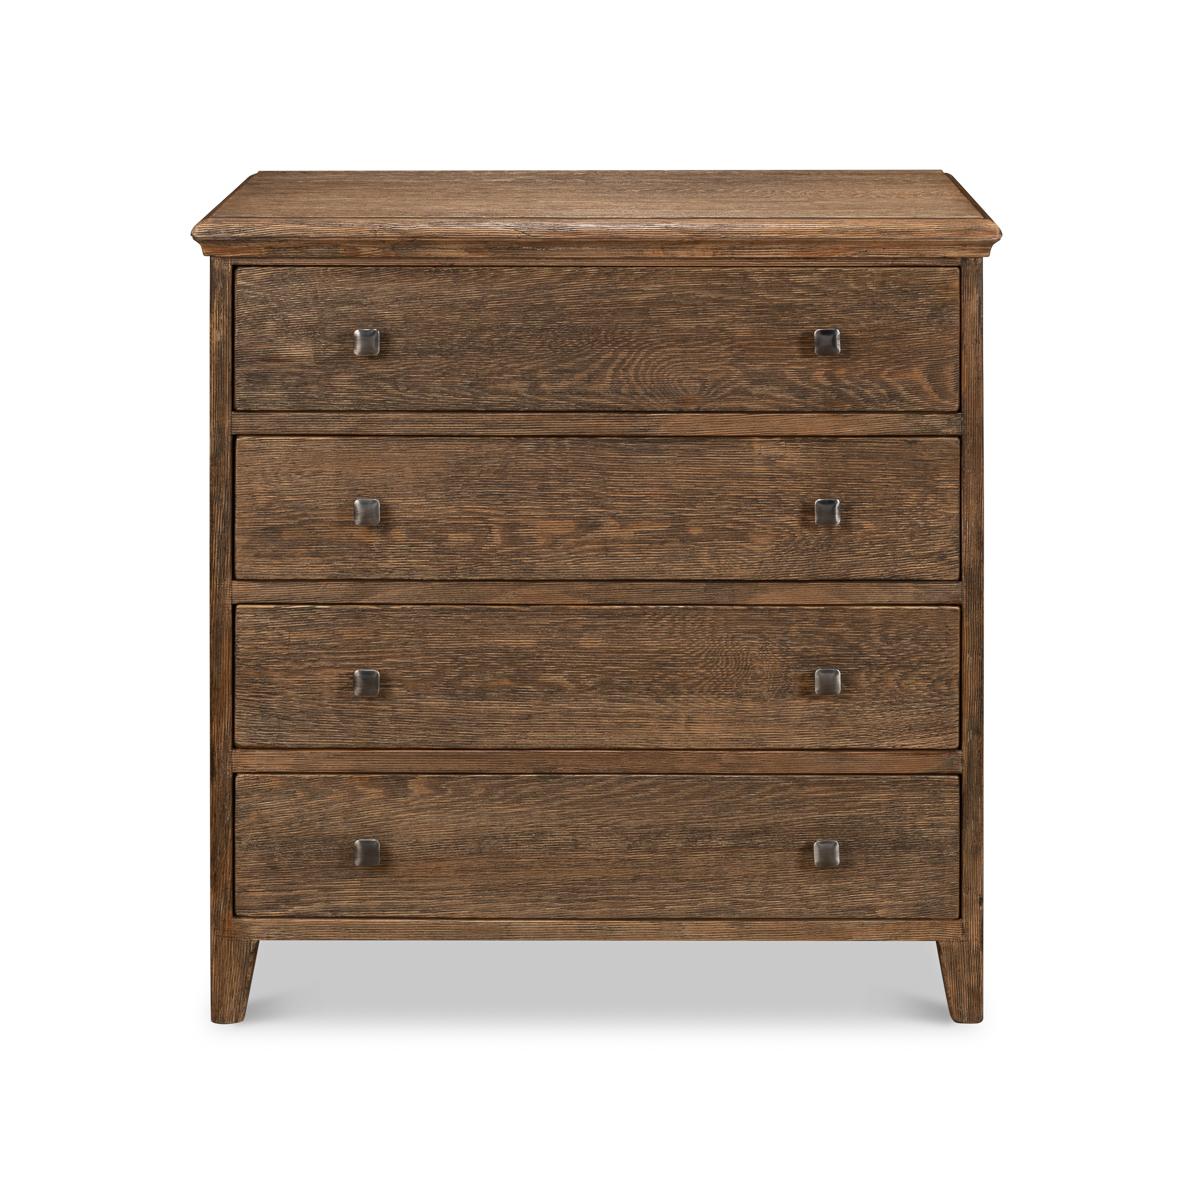 Strong, stately, and in the Husk finish, the chest takes on a classic antique feeling. Perfectly sized for multiple applications in any home. Use as a pair in any room for extra storage. It features clean lines, four drawers, a unique custom finish,